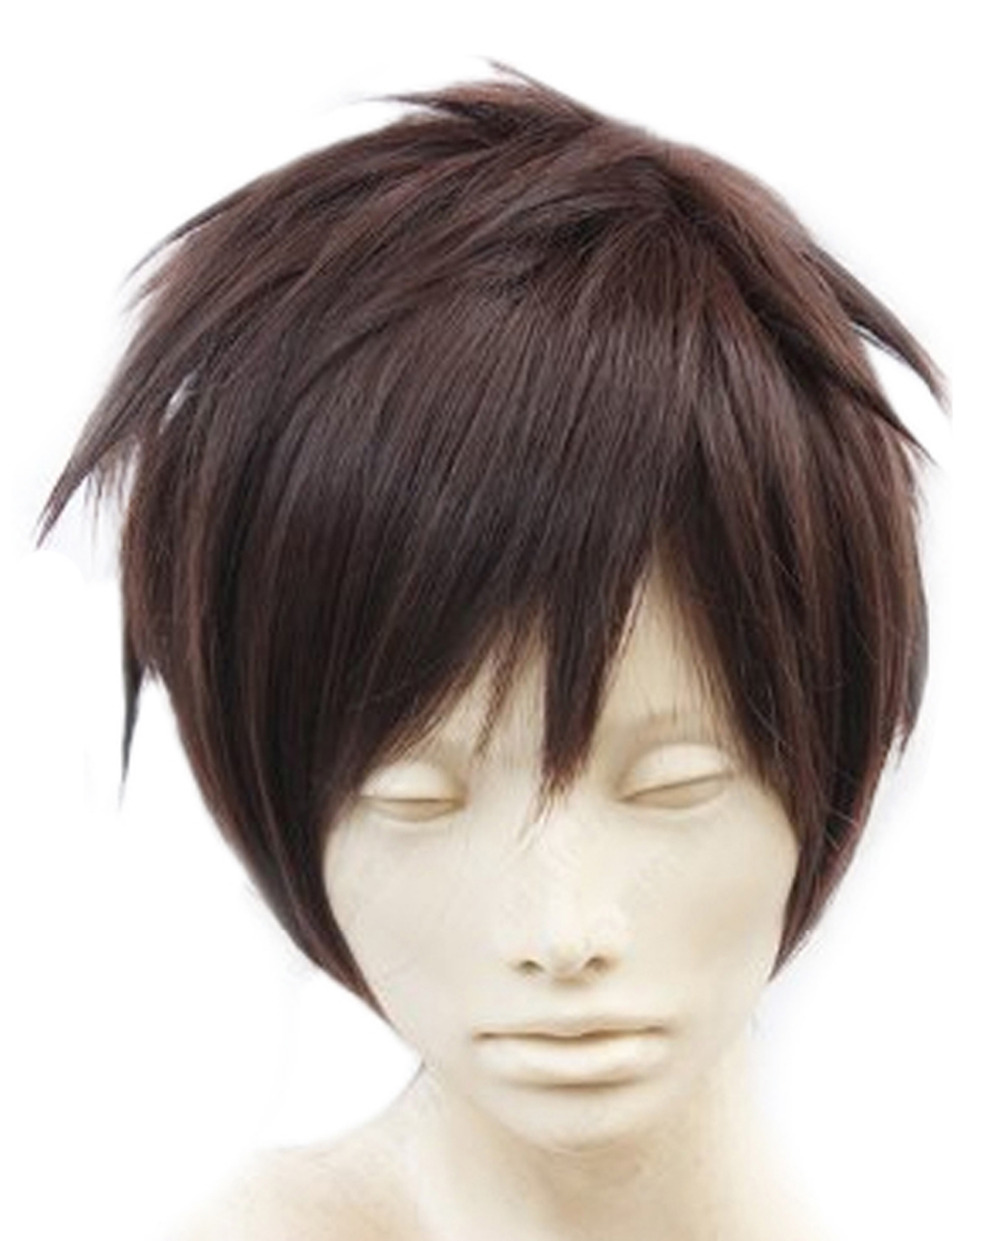 Image of Ohyes Newest Attack on Titan Eren Jaeger Short Dark Brown Anime Cosplay Wig Free Wig Cap